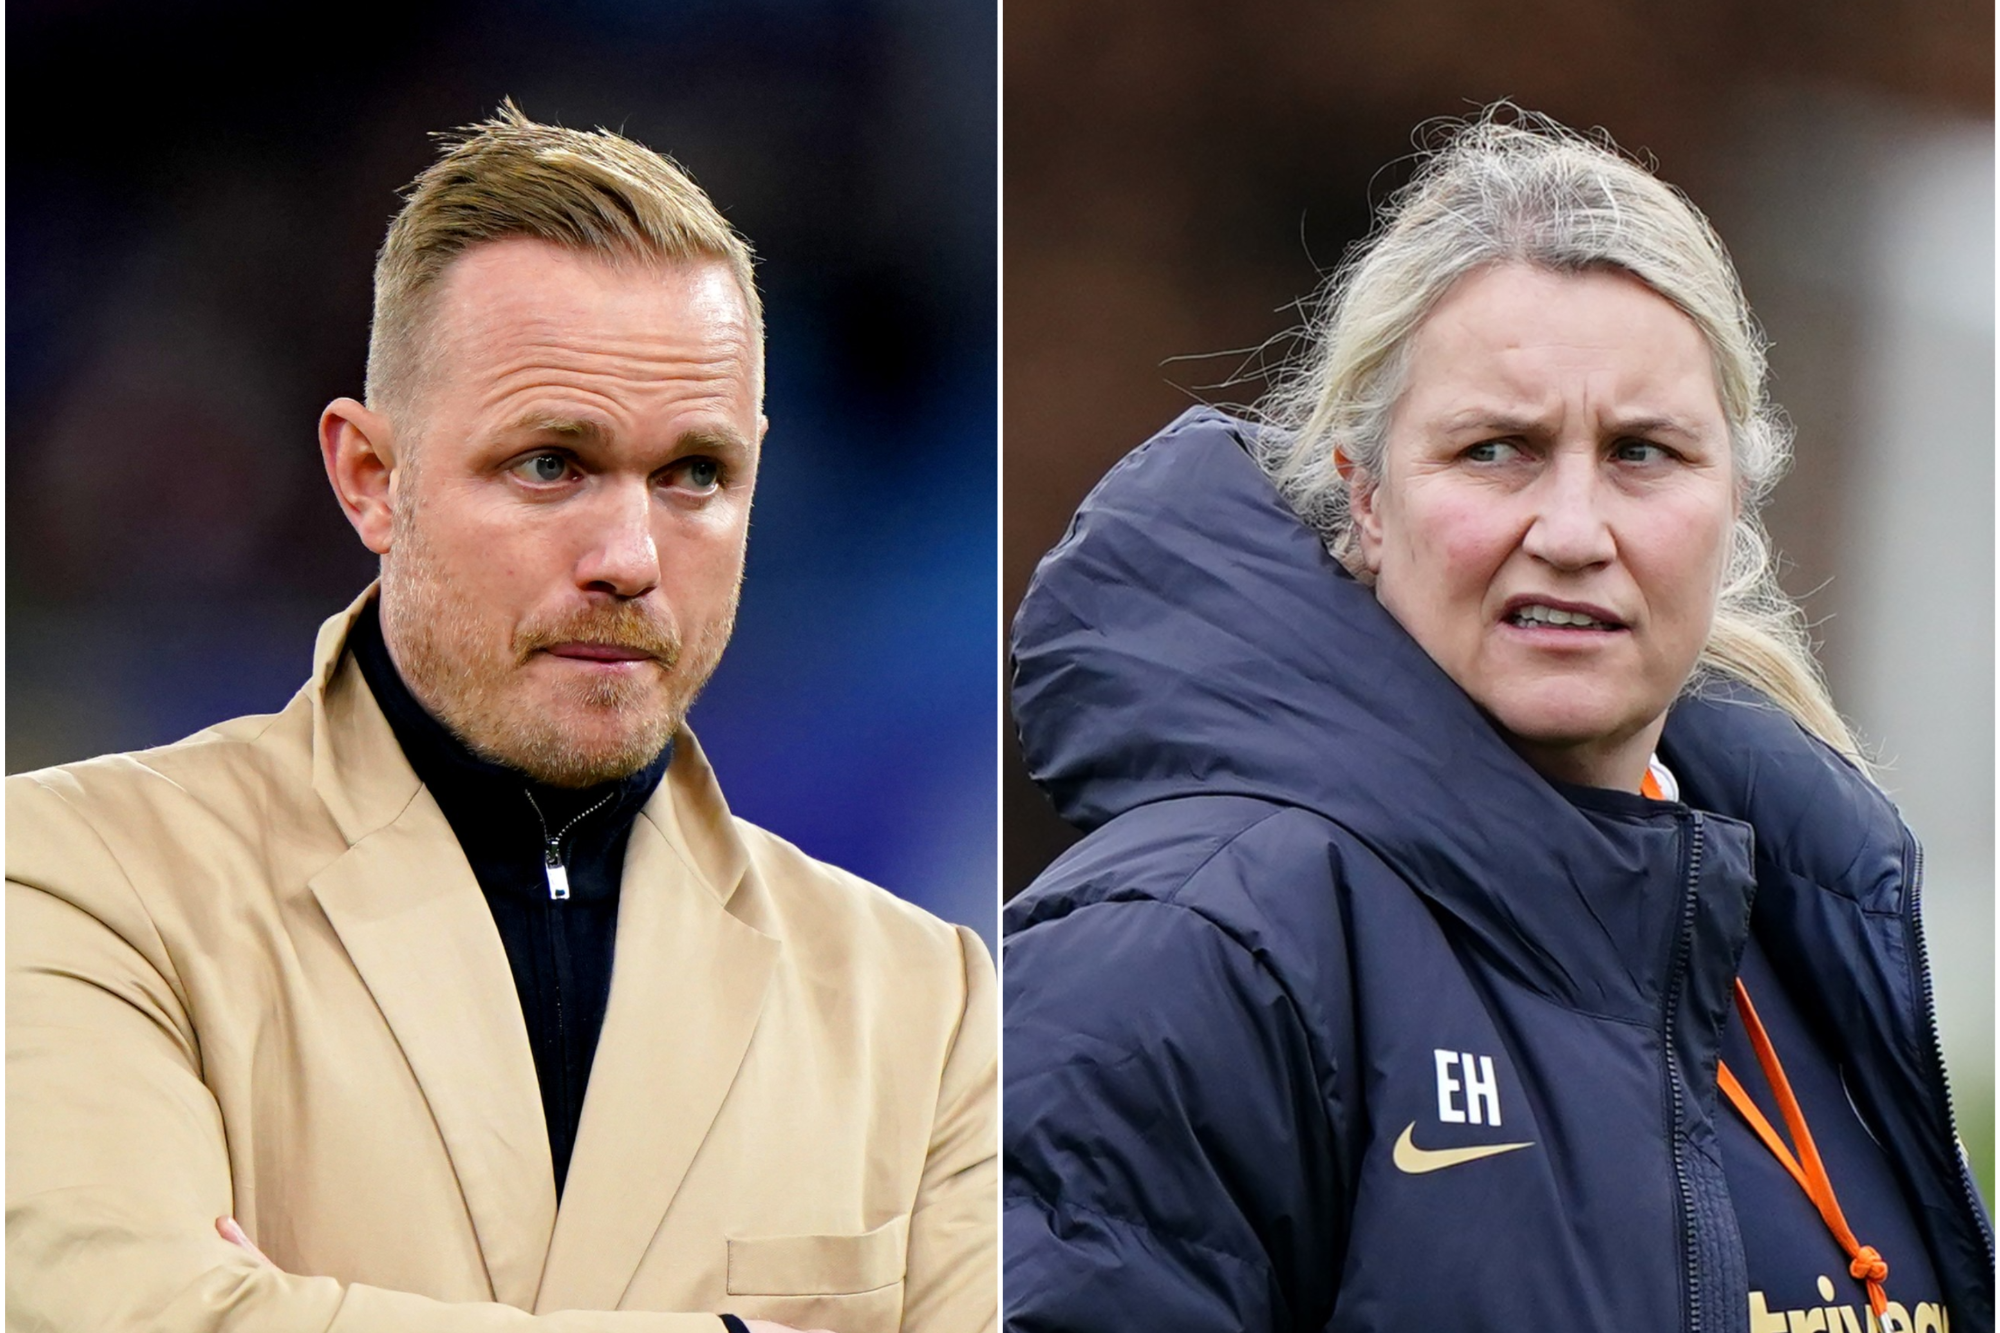 Arsenal manager Jonas Eidevall (left) has been accused of ‘unacceptable’ behaviour by Chelsea counterpart Emma Hayes